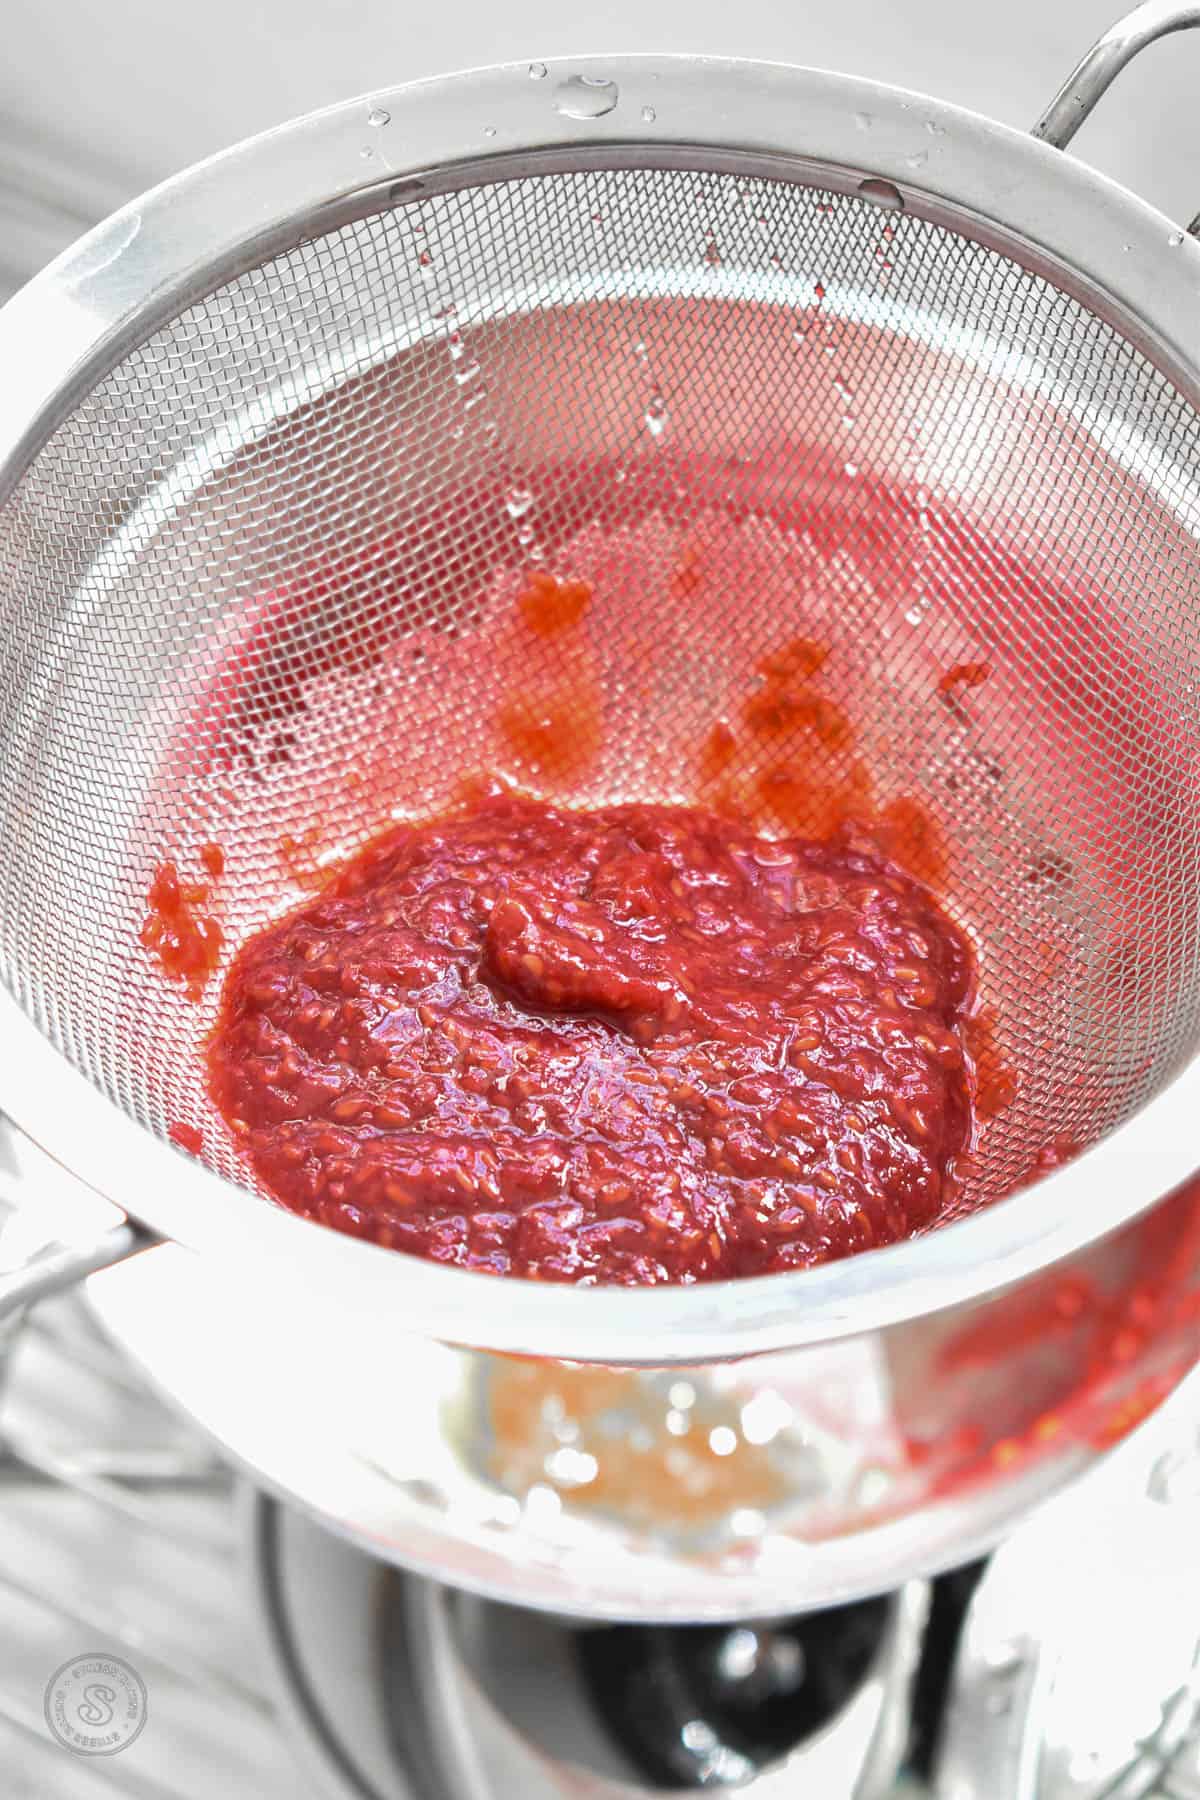 Raspberry jam being pressed through a fine mesh sieve to get the syrup